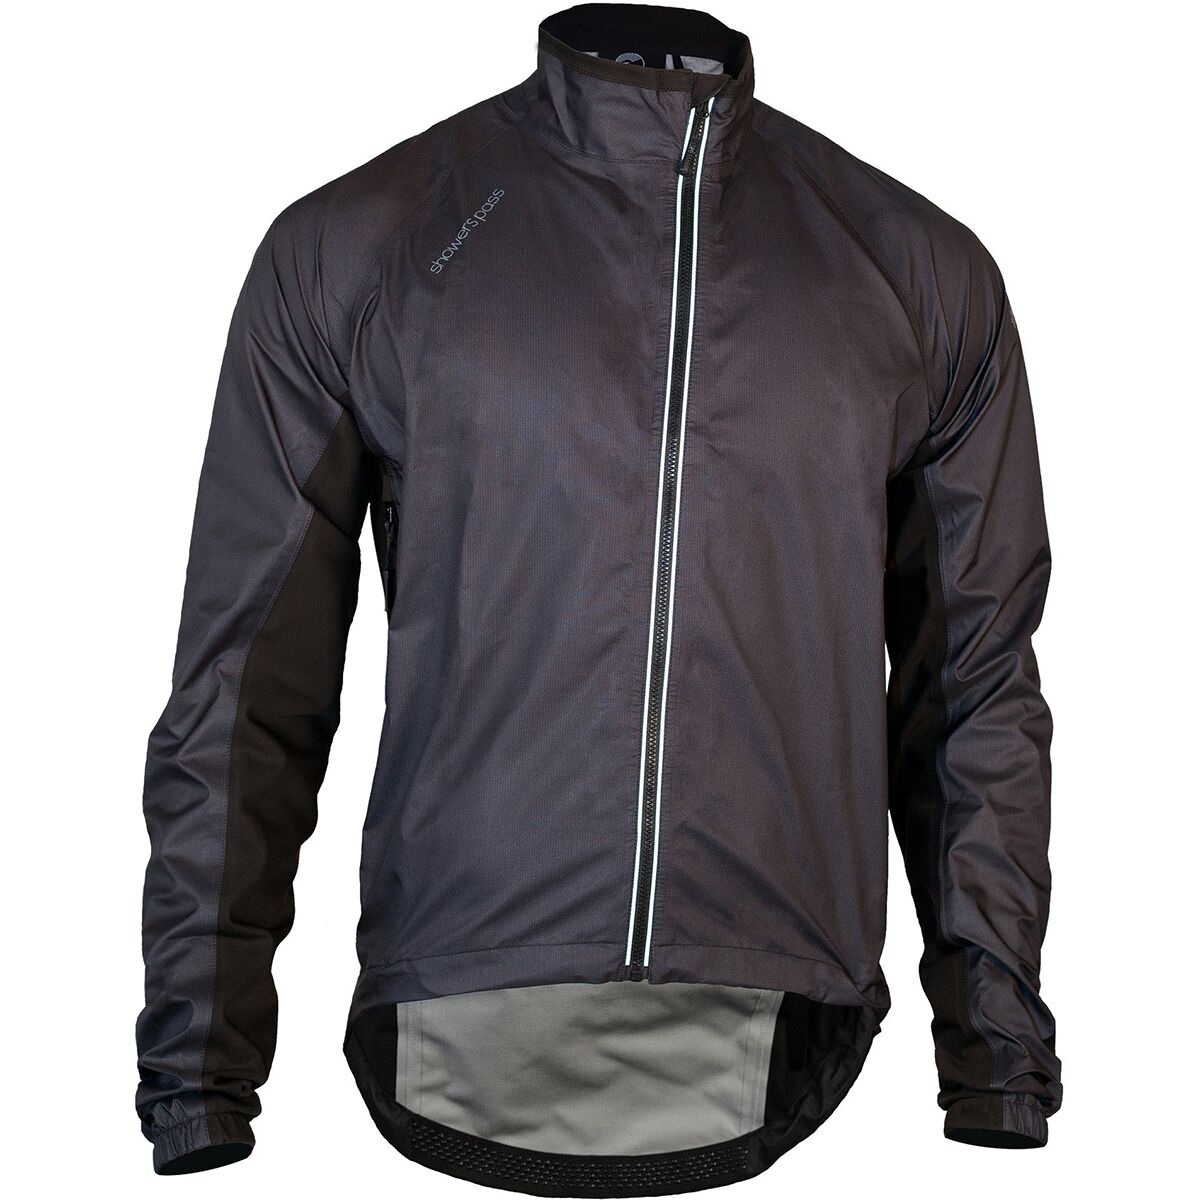 Showers Pass Spring Classic Jacket - Men's